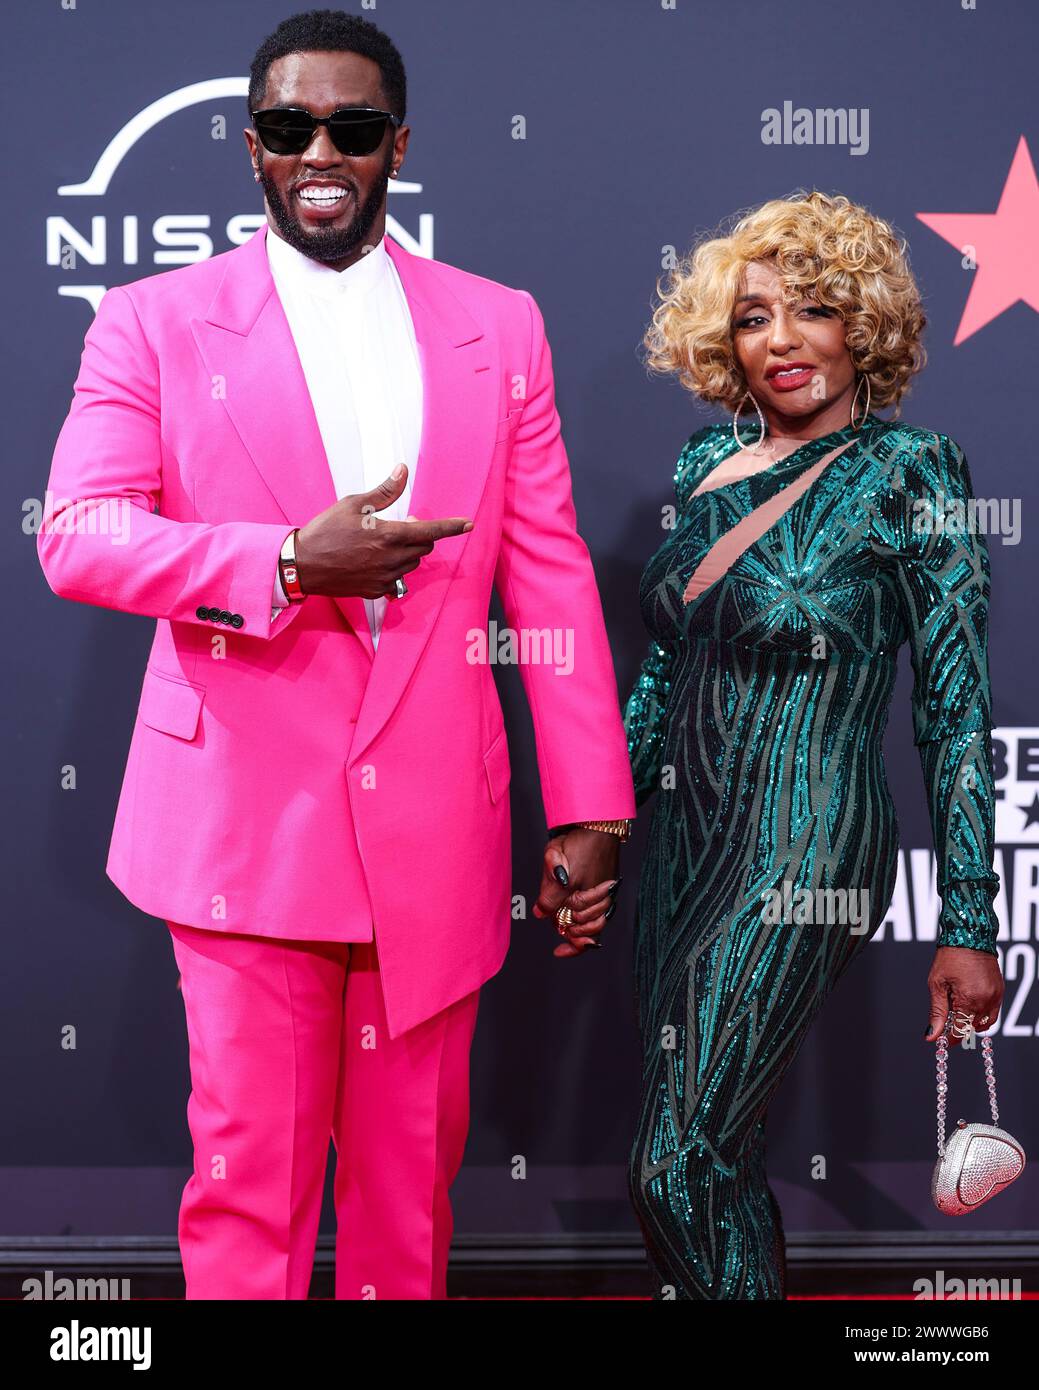 (FILE) Diddy's Los Angeles and Miami Homes Raided by Federal Law Enforcement on Monday, March 25, 2024. LOS ANGELES, CALIFORNIA, USA - JUNE 26: American rapper, record producer and record executive Diddy (Sean Love Combs, also known by his stage names Puff Daddy or P. Diddy) and mother Janice Combs arrive at the BET Awards 2022 held at Microsoft Theater at L.A. Live on June 26, 2022 in Los Angeles, California, United States. (Photo by Xavier Collin/Image Press Agency) Stock Photo